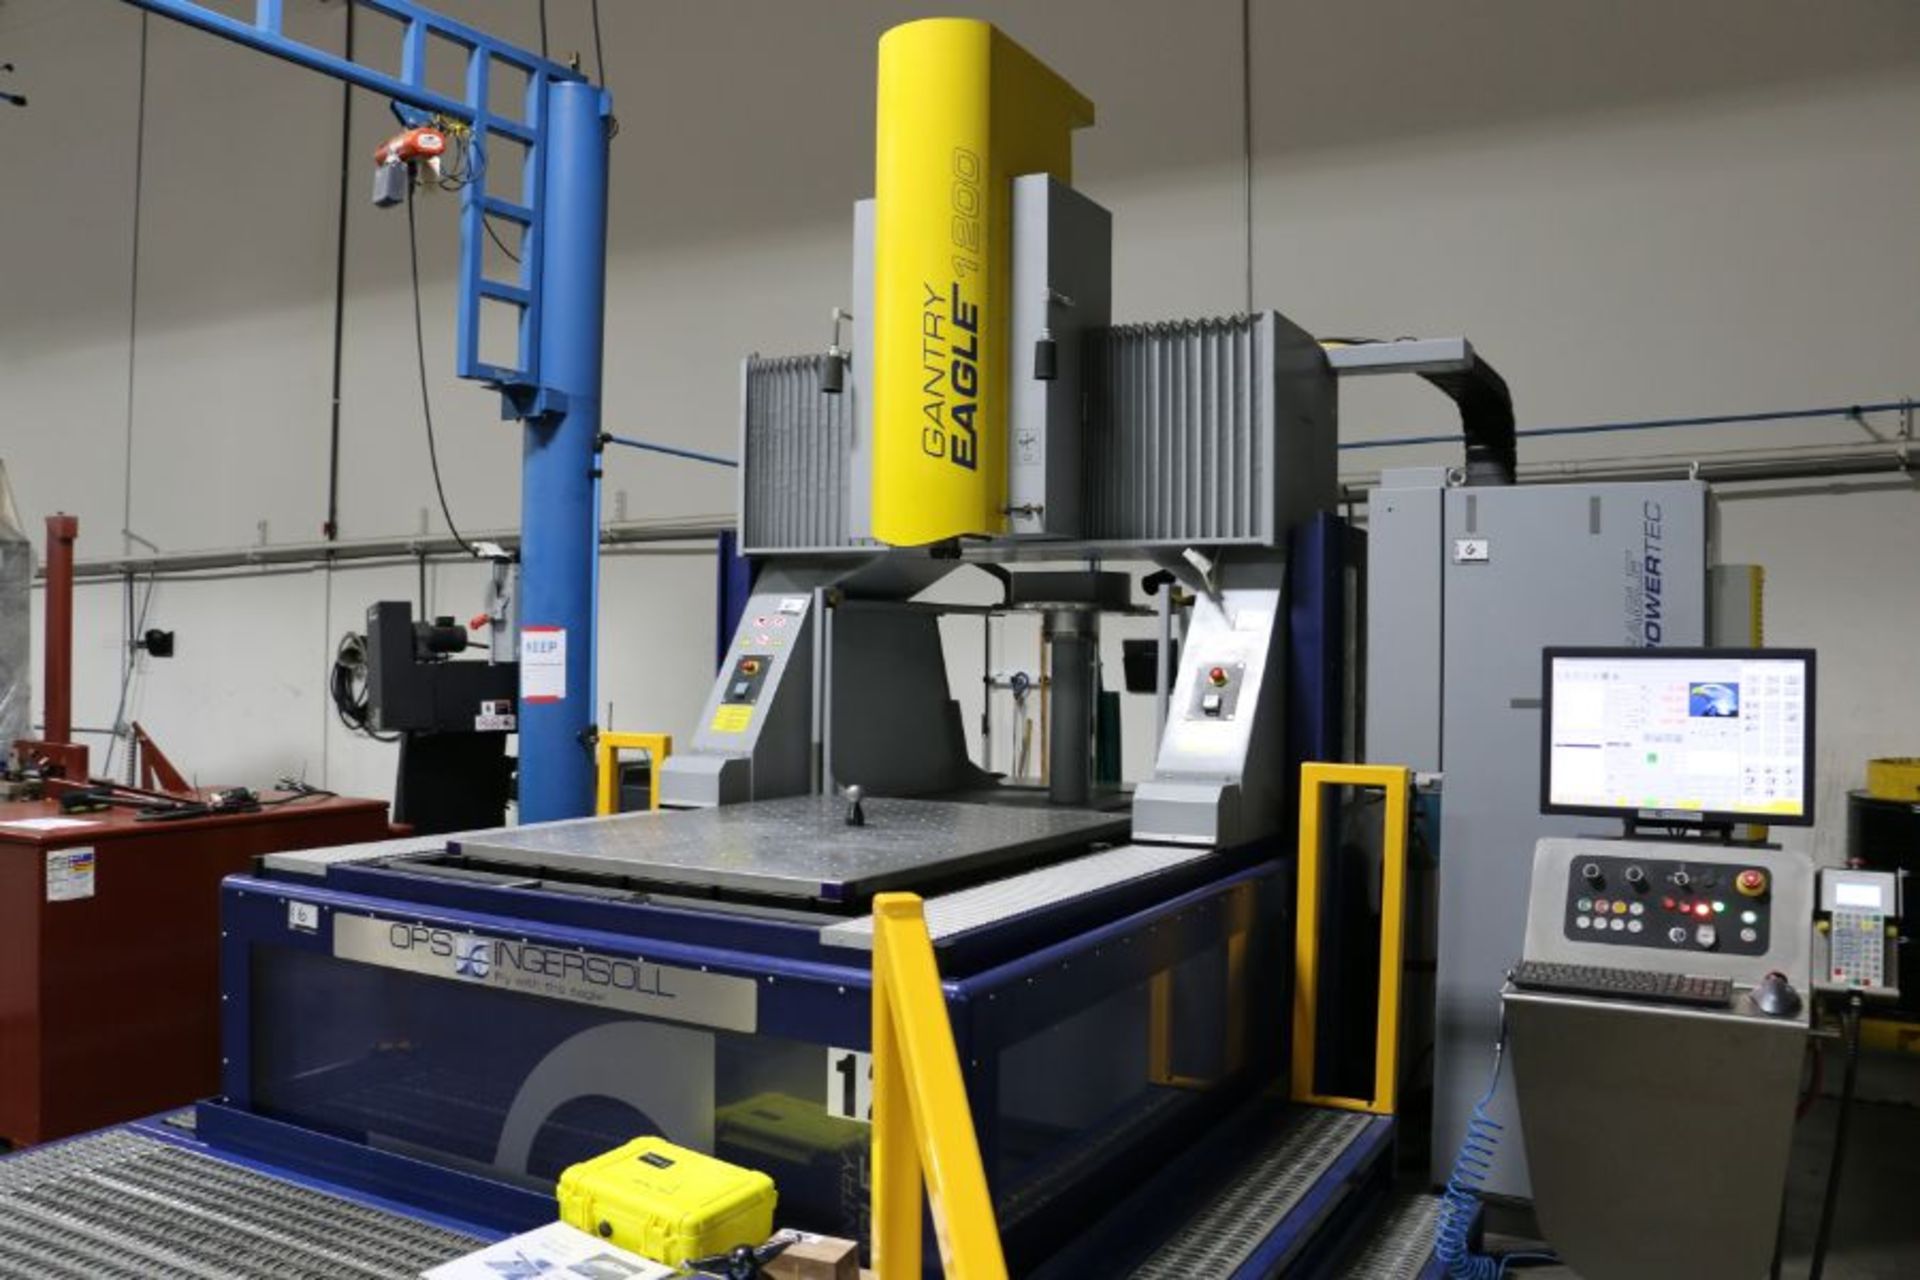 OPS Ingersoll Gantry Eagle 1200 CNC Sinker EDM, Dual 32-Bit Based Control, C-Axis, Powertec 60A - Image 5 of 18